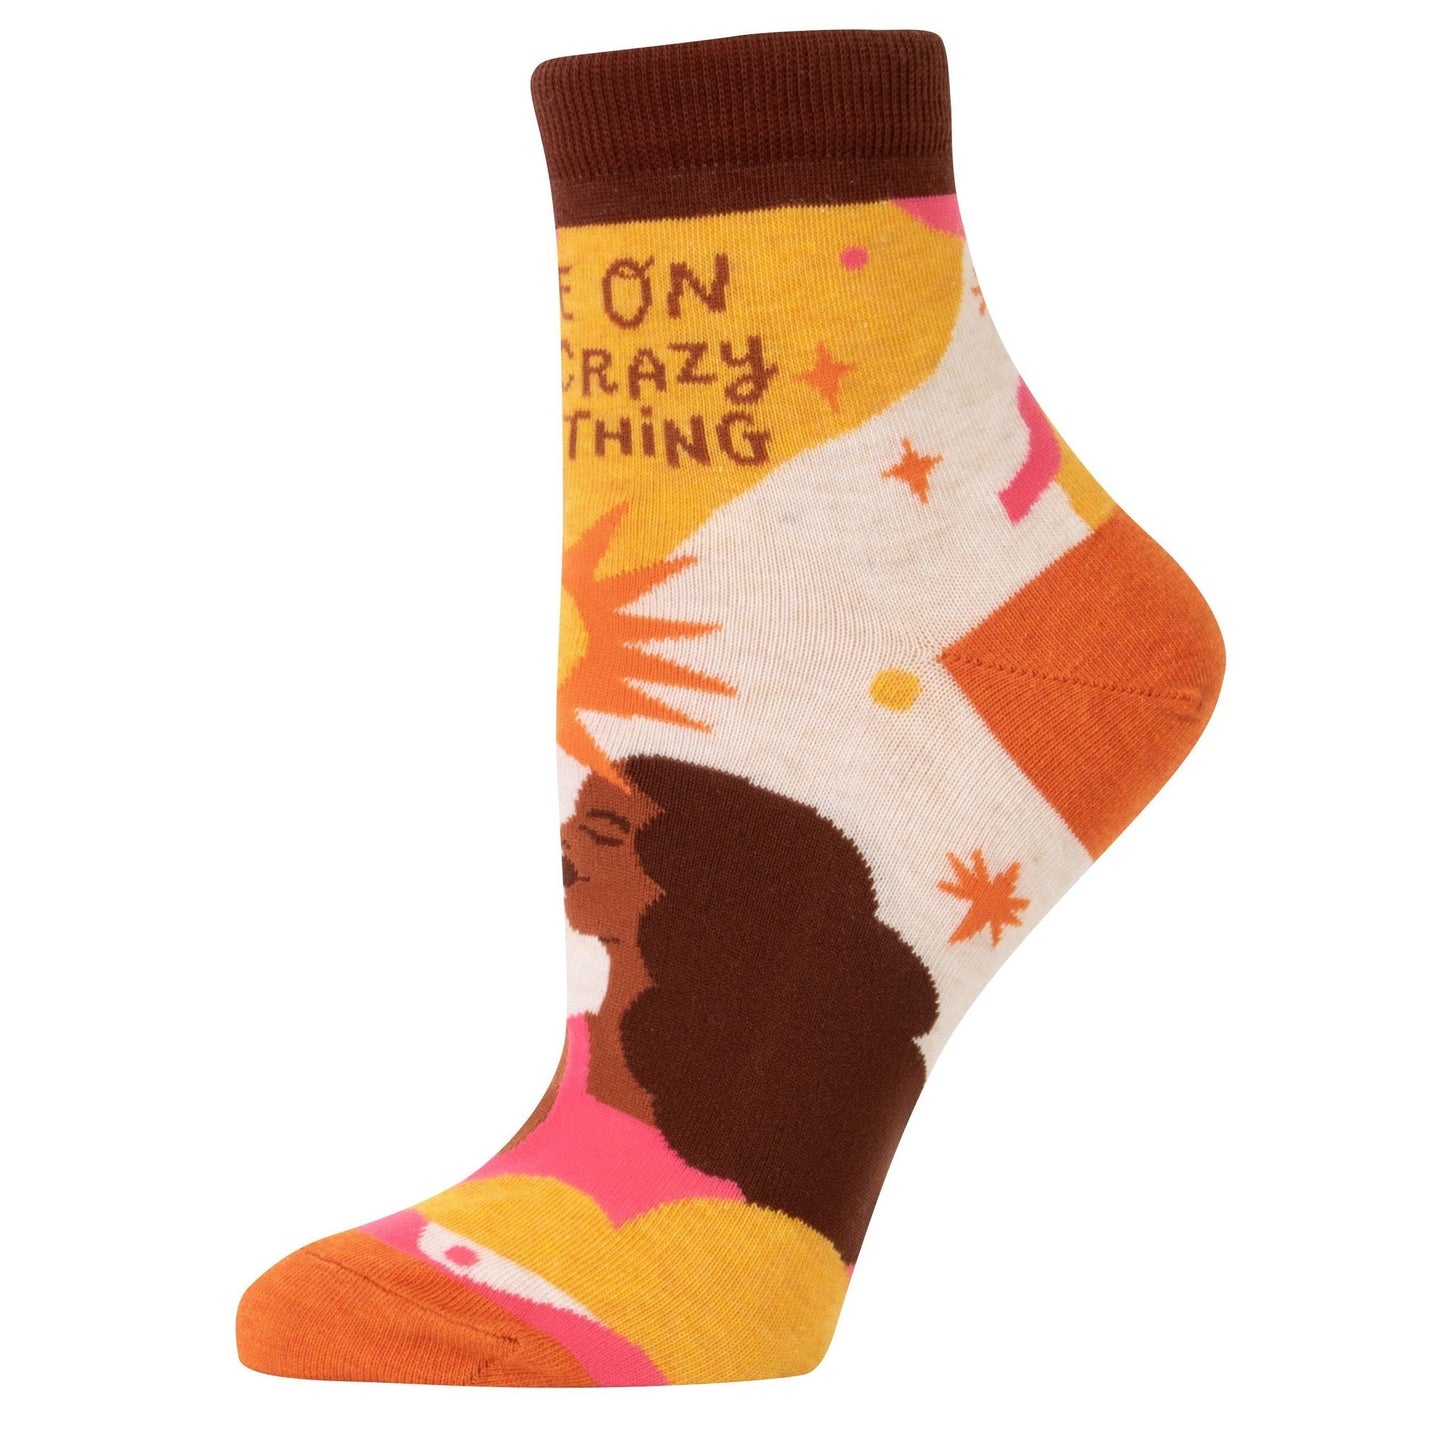 Shine On You Crazy Shiny Thing Women's Ankle Socks